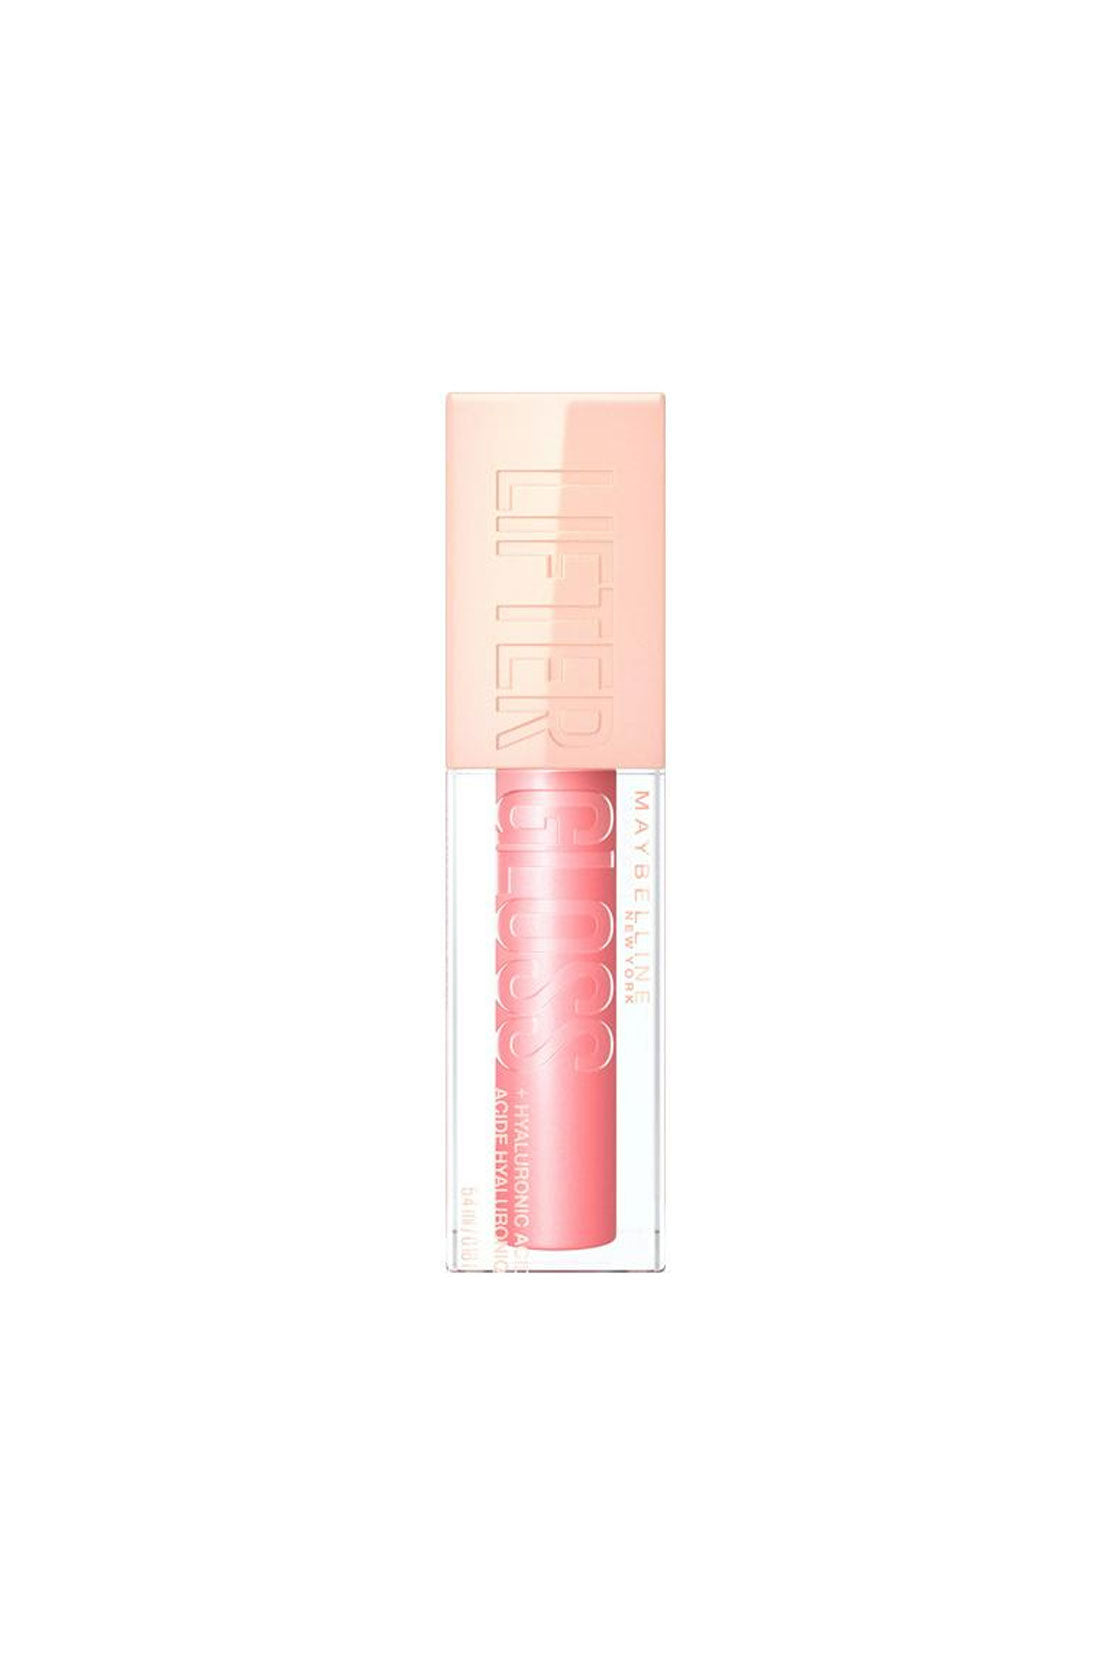 Lifter Gloss Hydrating Lip Gloss with Hyaluronic Acid - 004 Silk RIOS